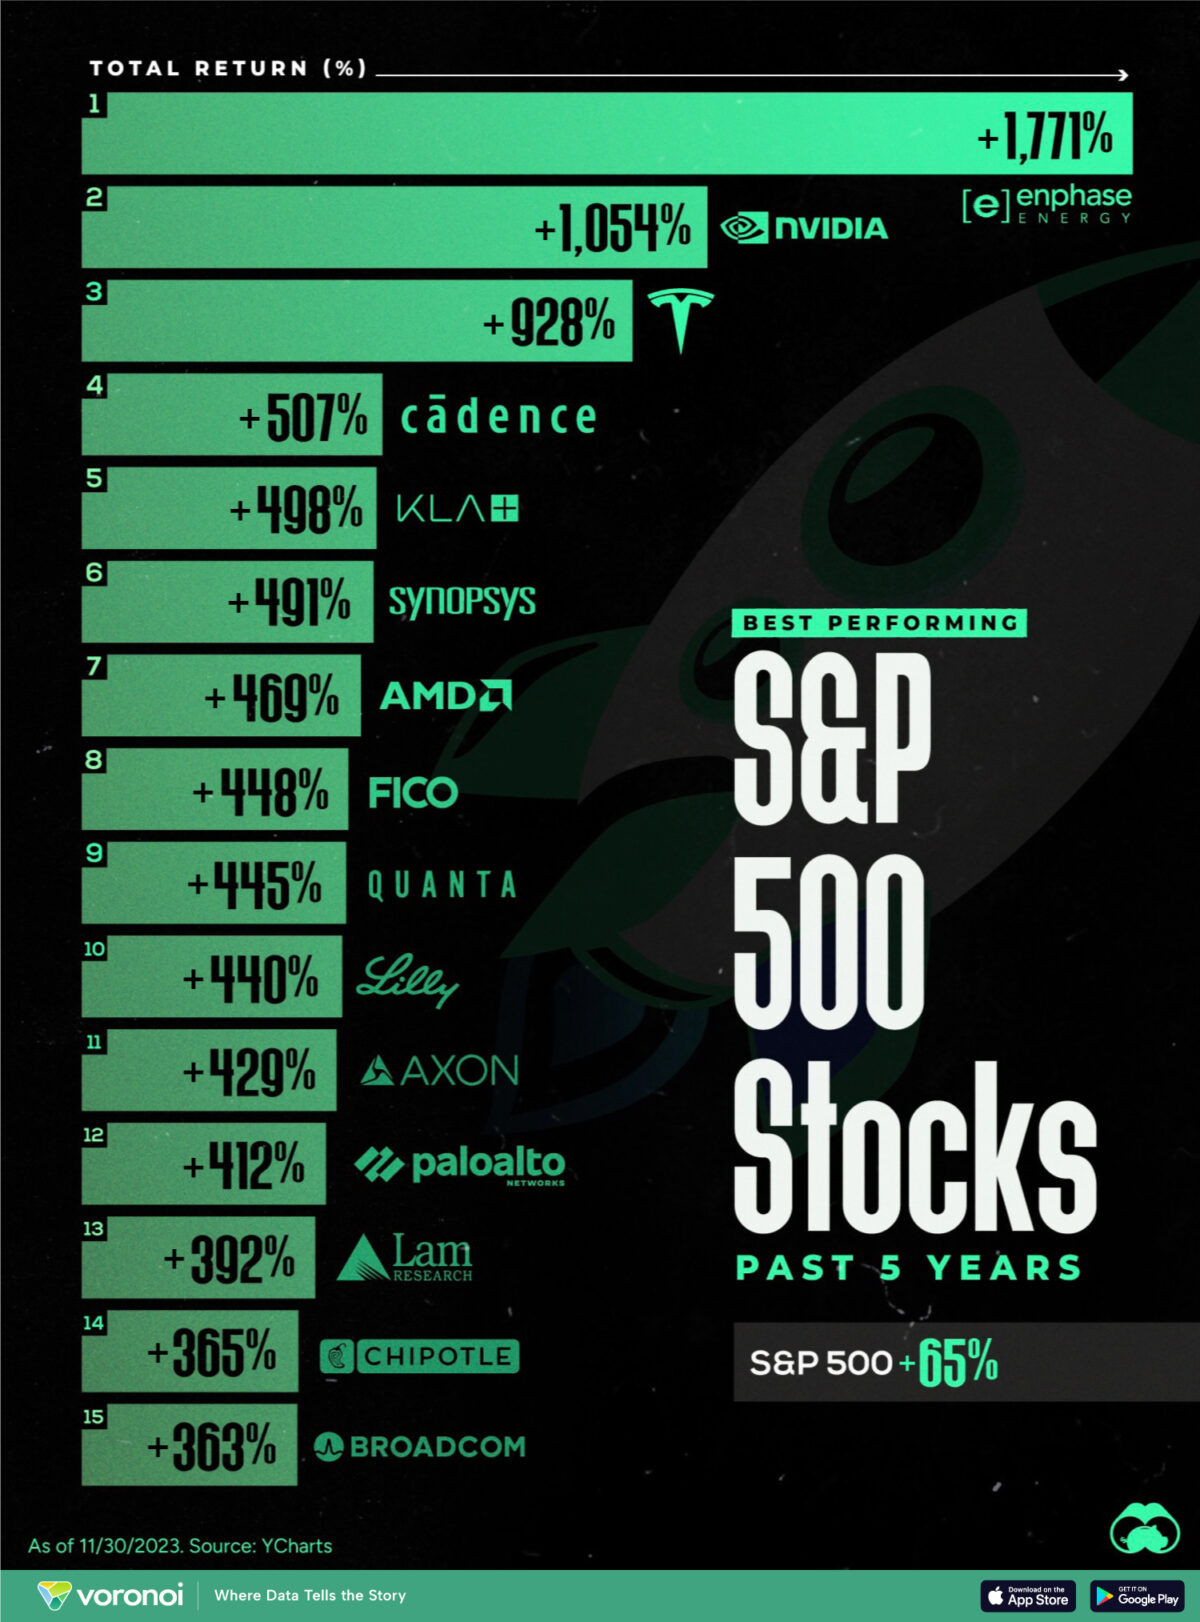 The Top S&P 500 Stocks by 5-Year Total Returns